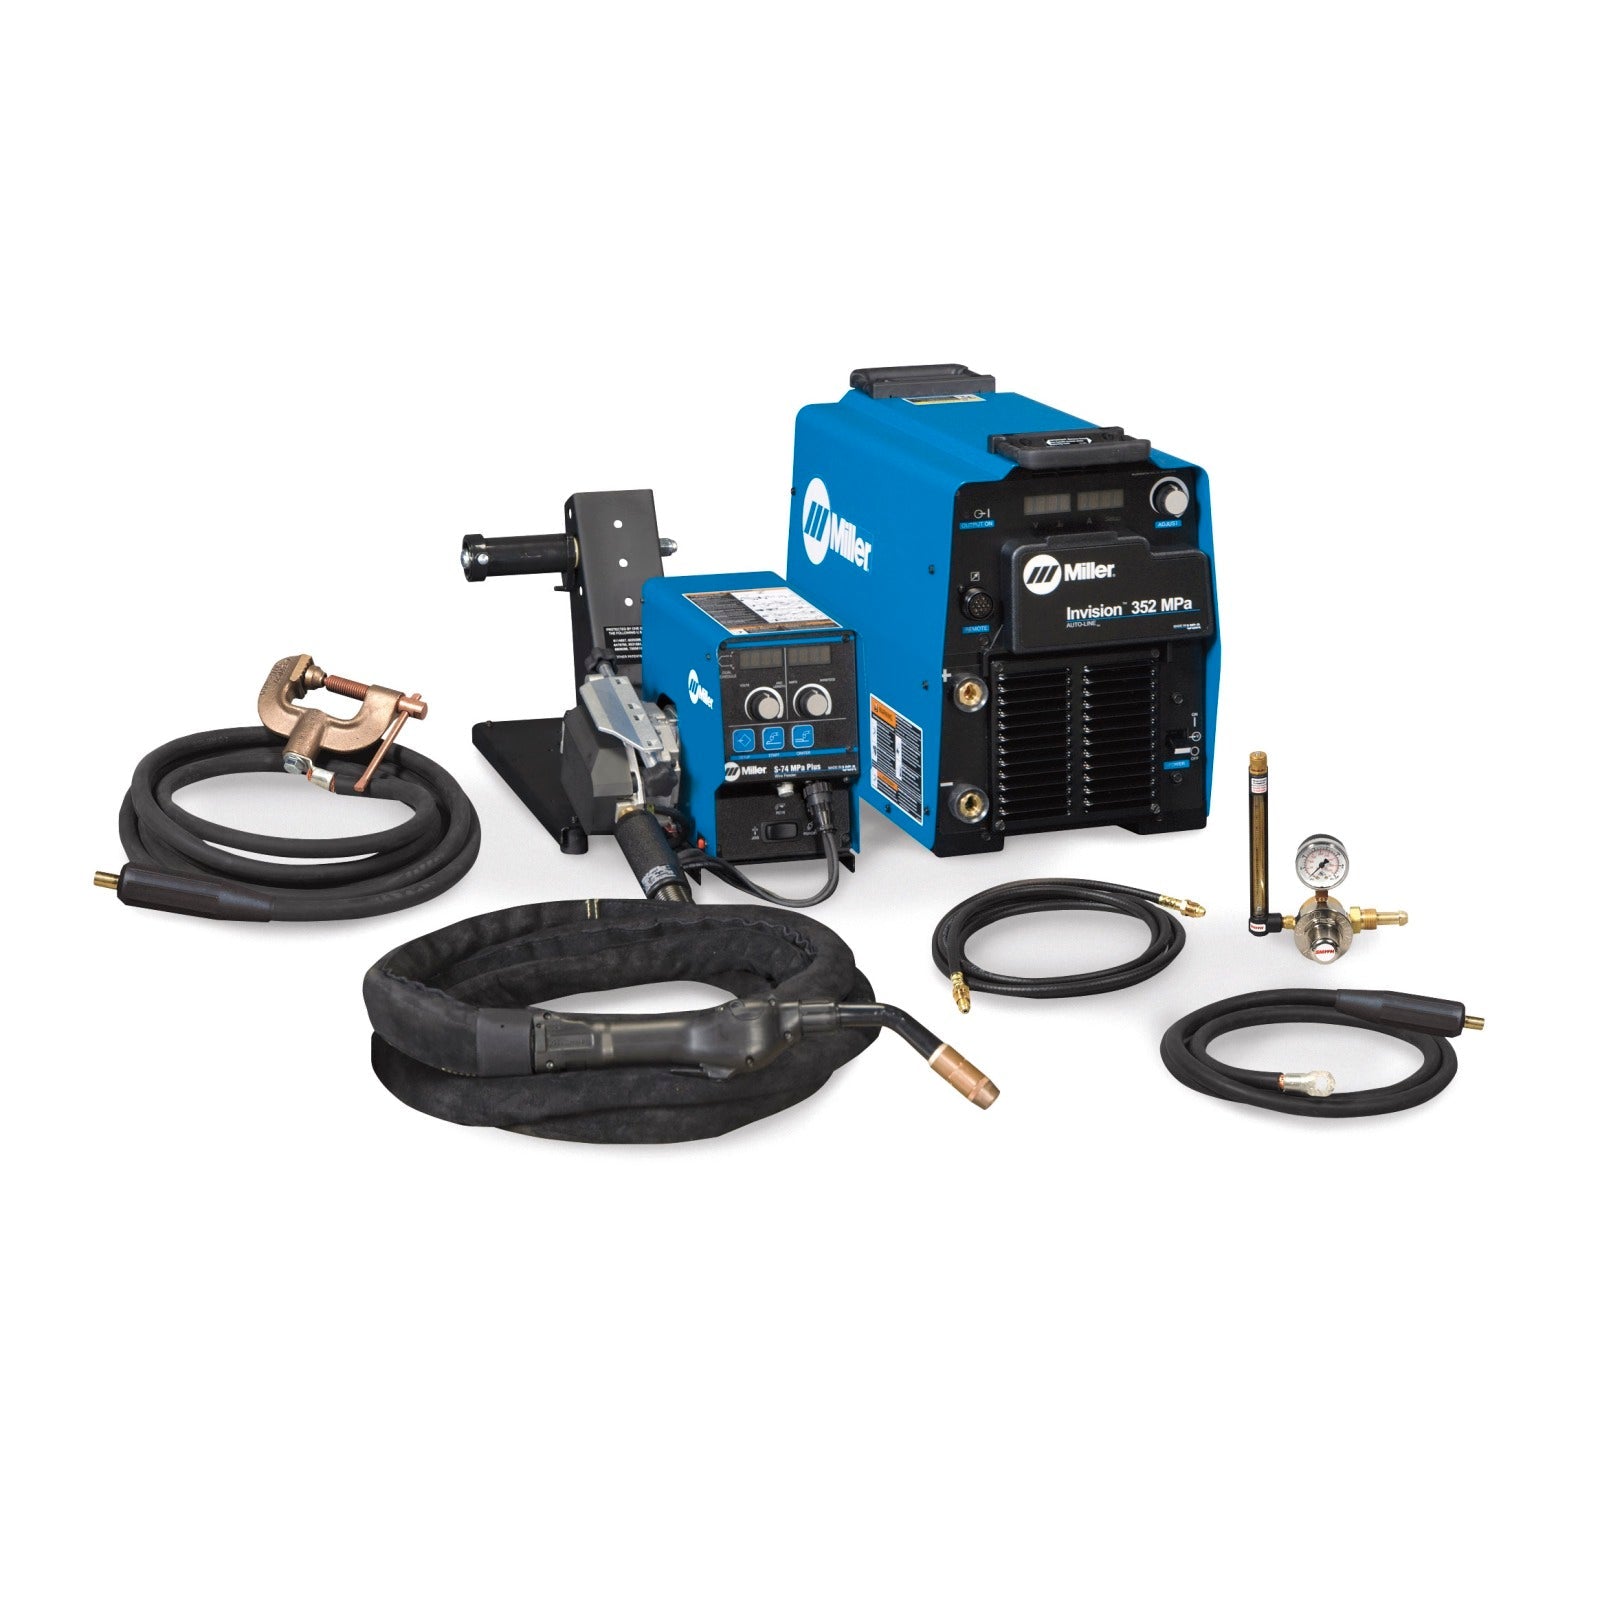 Miller Invision 352 MPa MIG Welder with Feeder, Accessory Package, and Cart (951411)